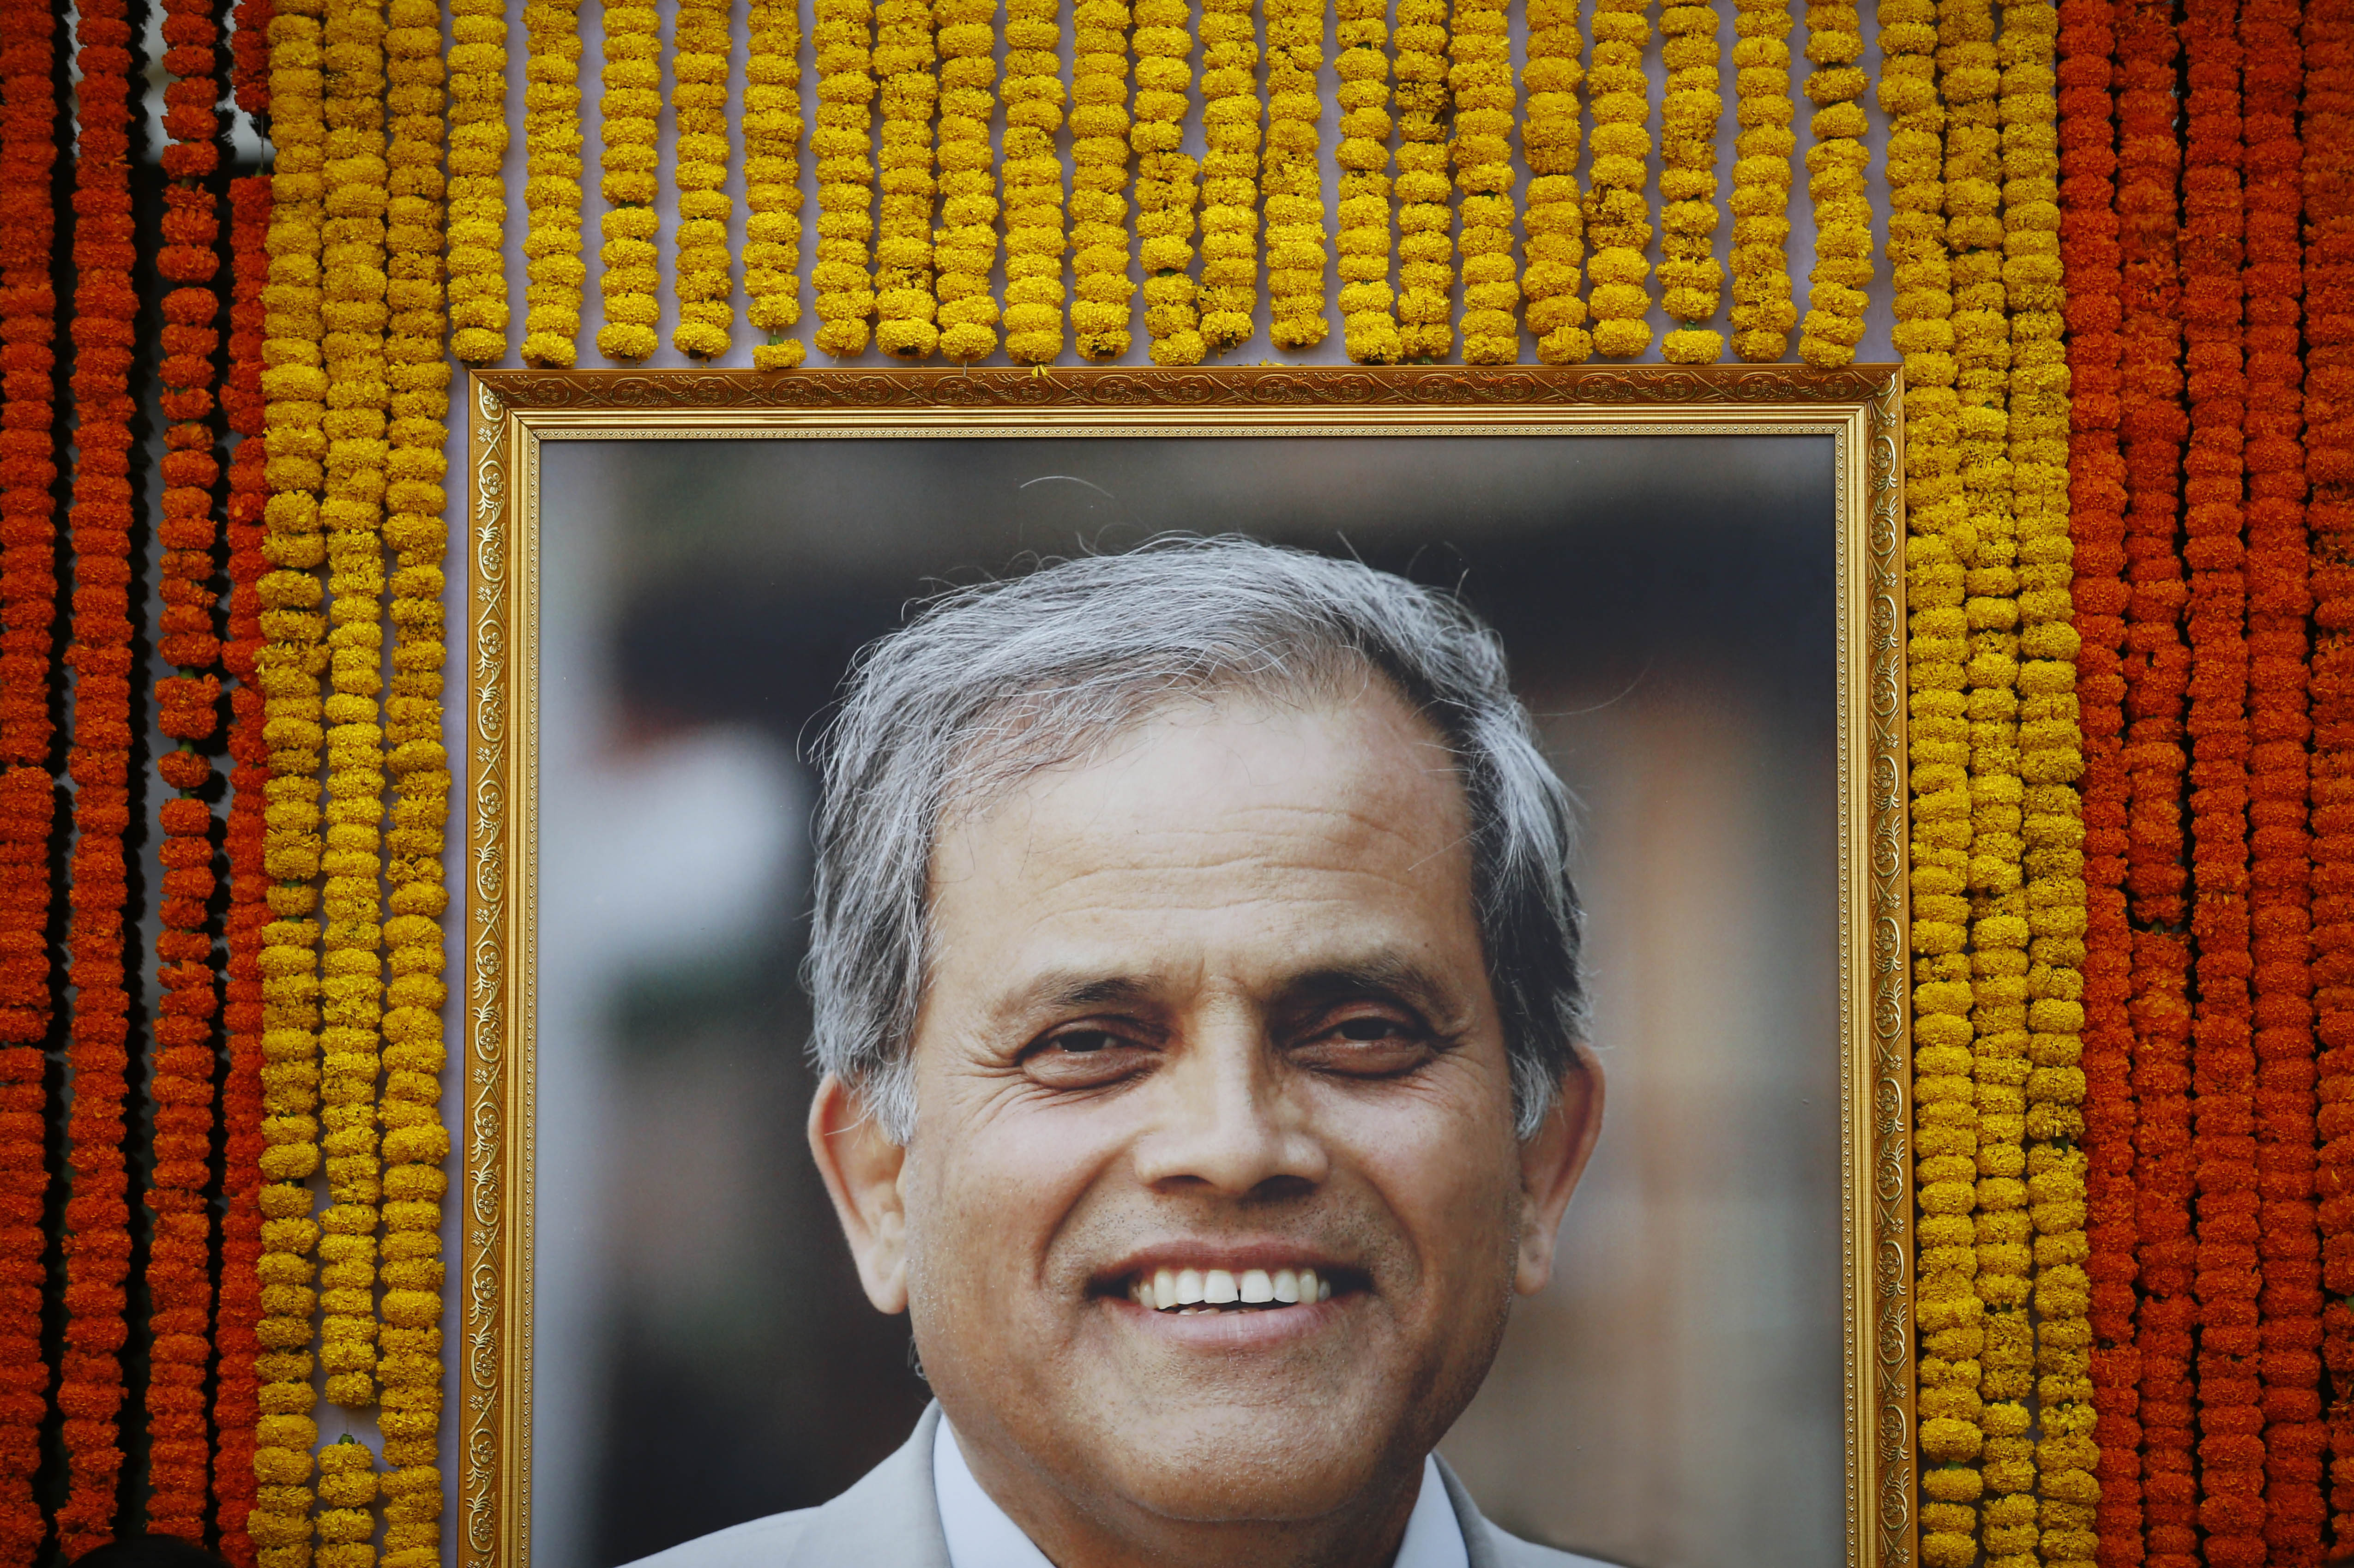 A portrait of the renowned neurosurgeon Dr Upendra Devkota, pictured at the Neuro Hospital in Kathmandu where people from all walks gathered to pay their final respects, on Tuesday, June 19, 2018. He passed away at the age of 64 after suffering from bile duct cancer. Photo/Skanda Gautam